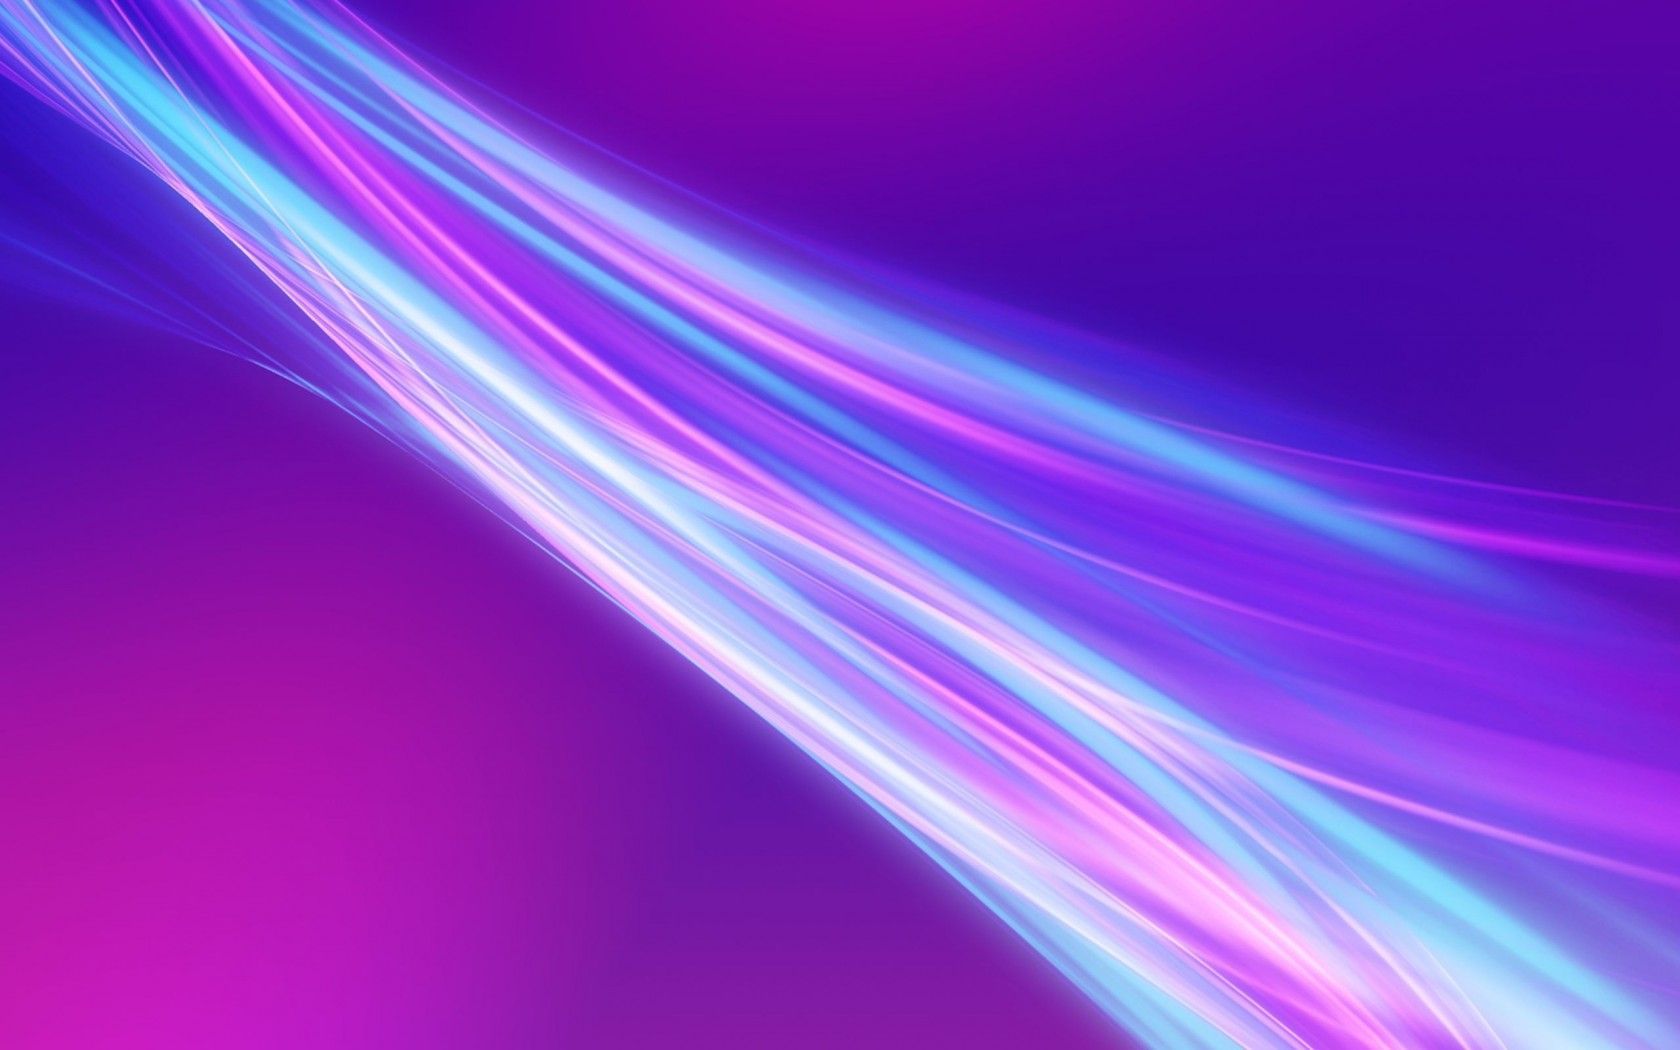 Texture, rays, strips, curve, neon, colors, background, hd wallpaper